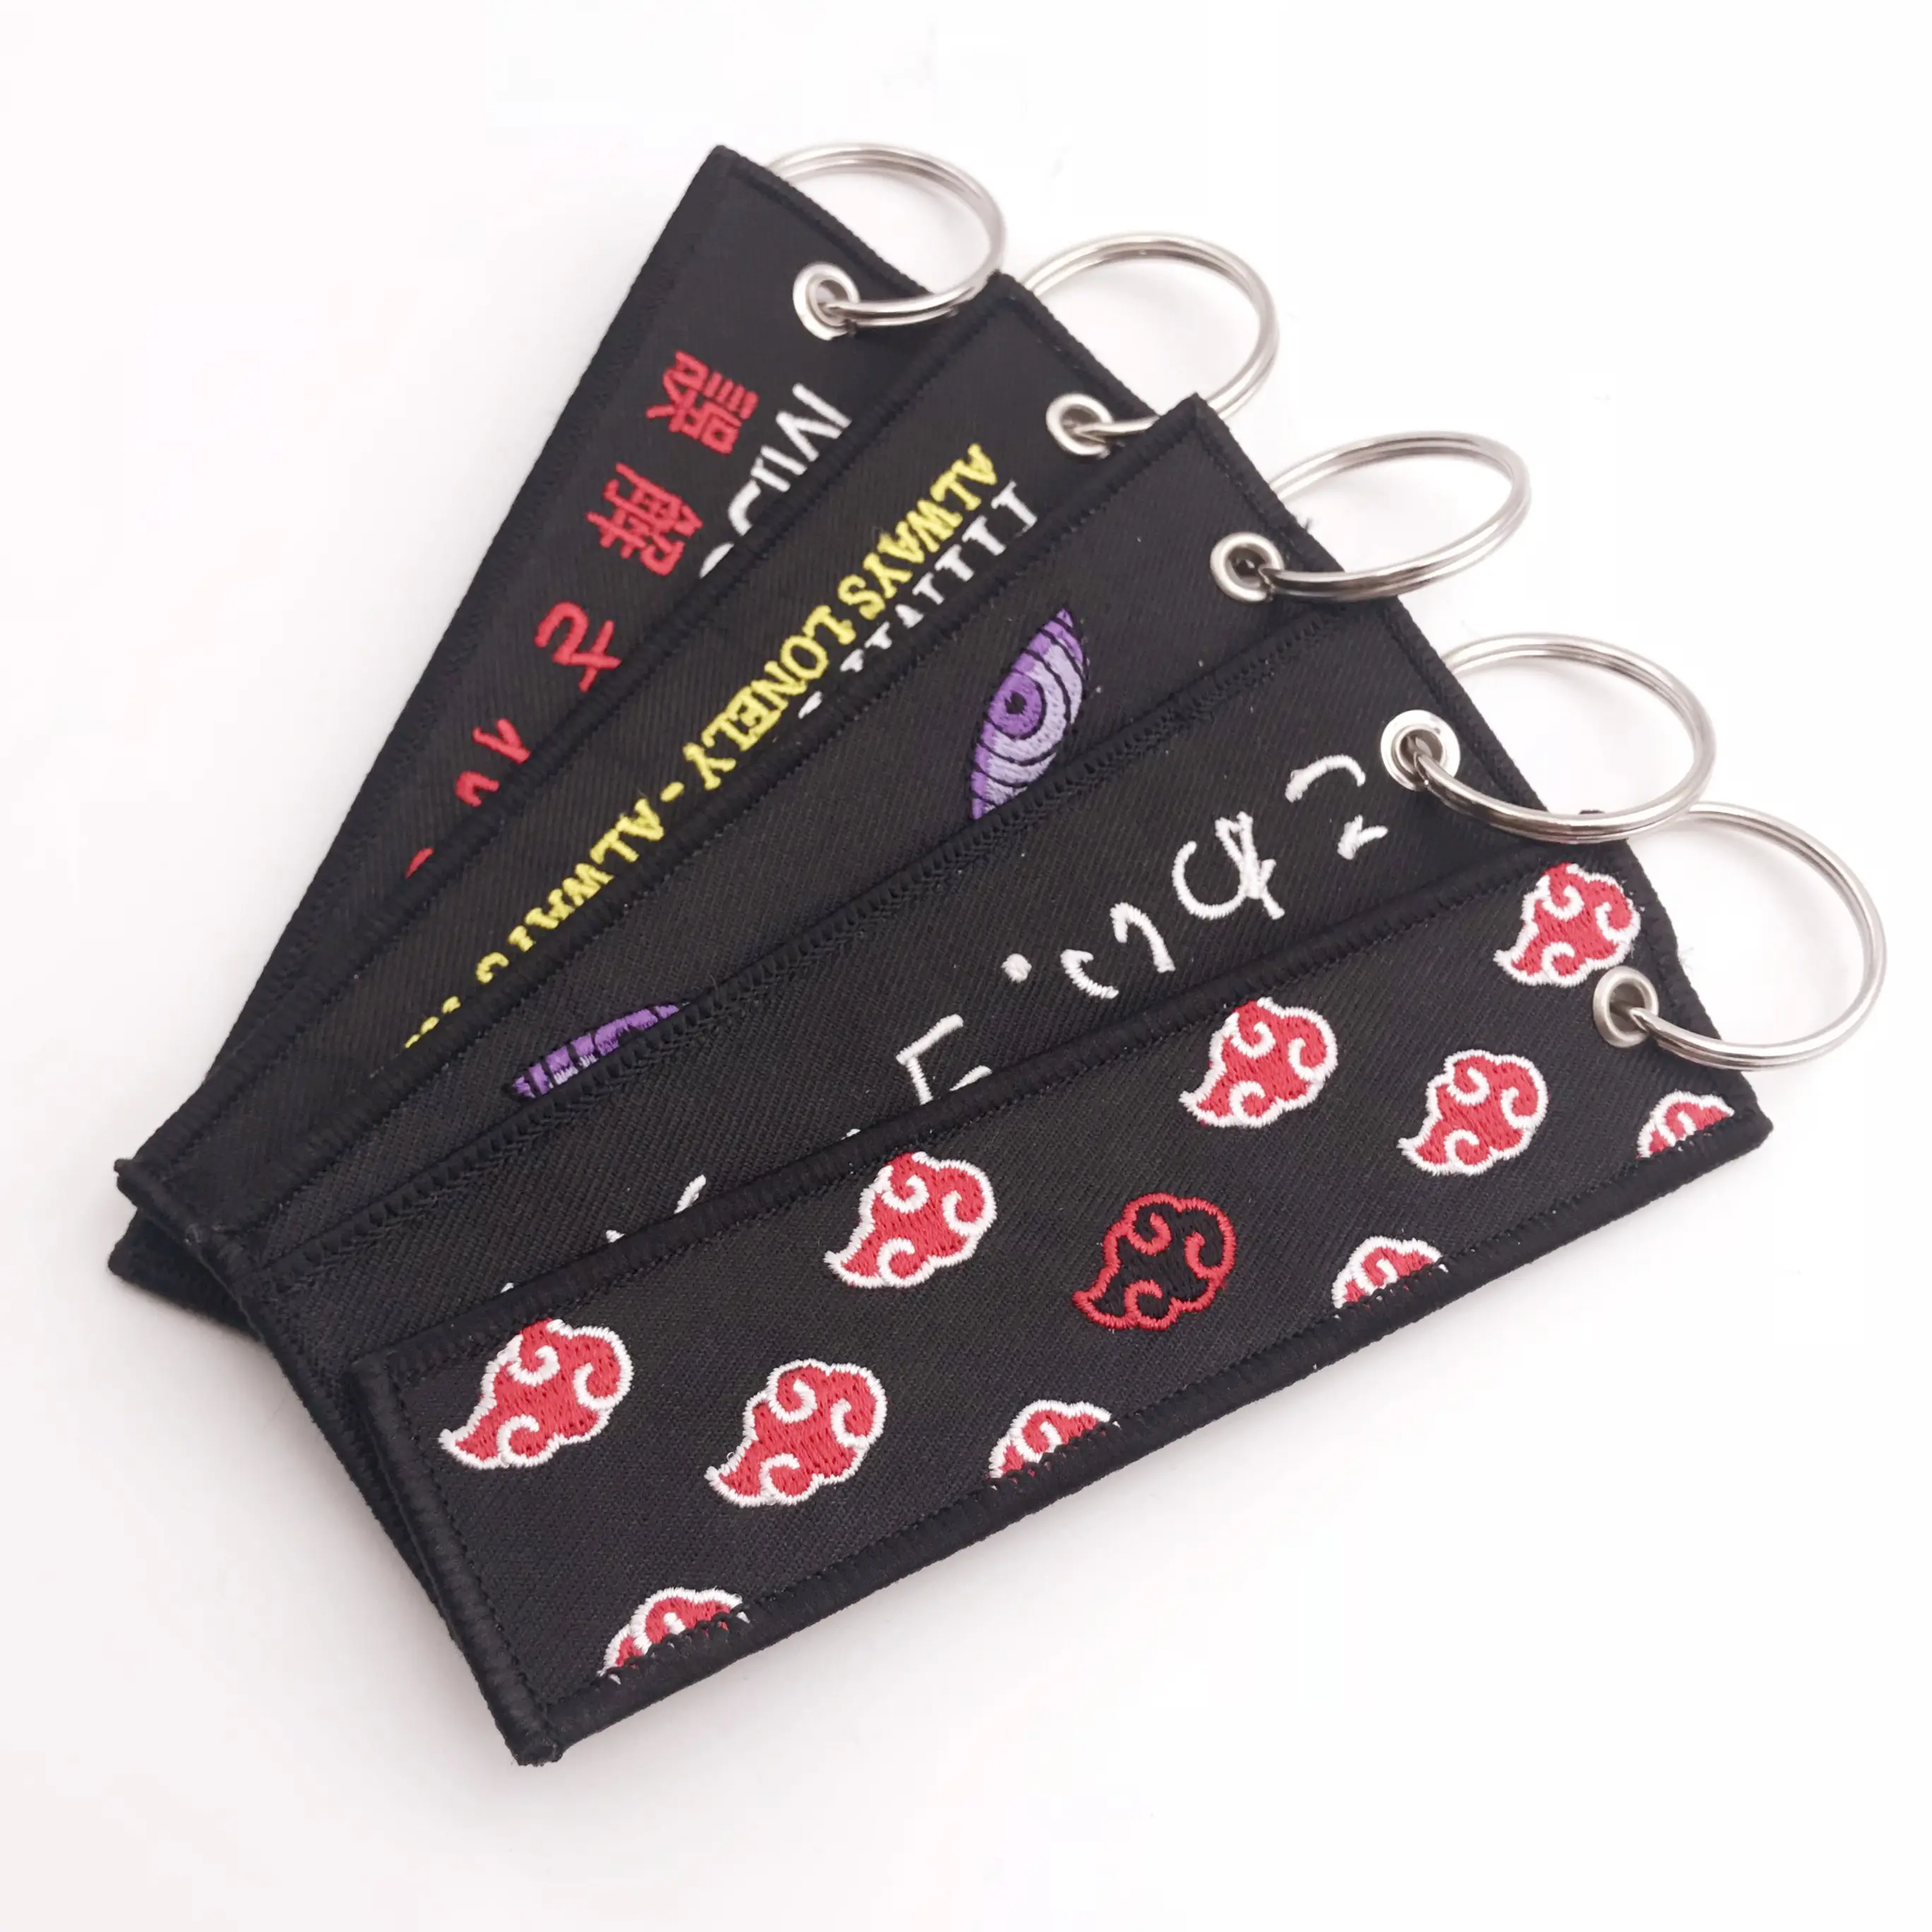 OEM Cartoon Long Purse Hanging Embroidery Key Chain For Gift